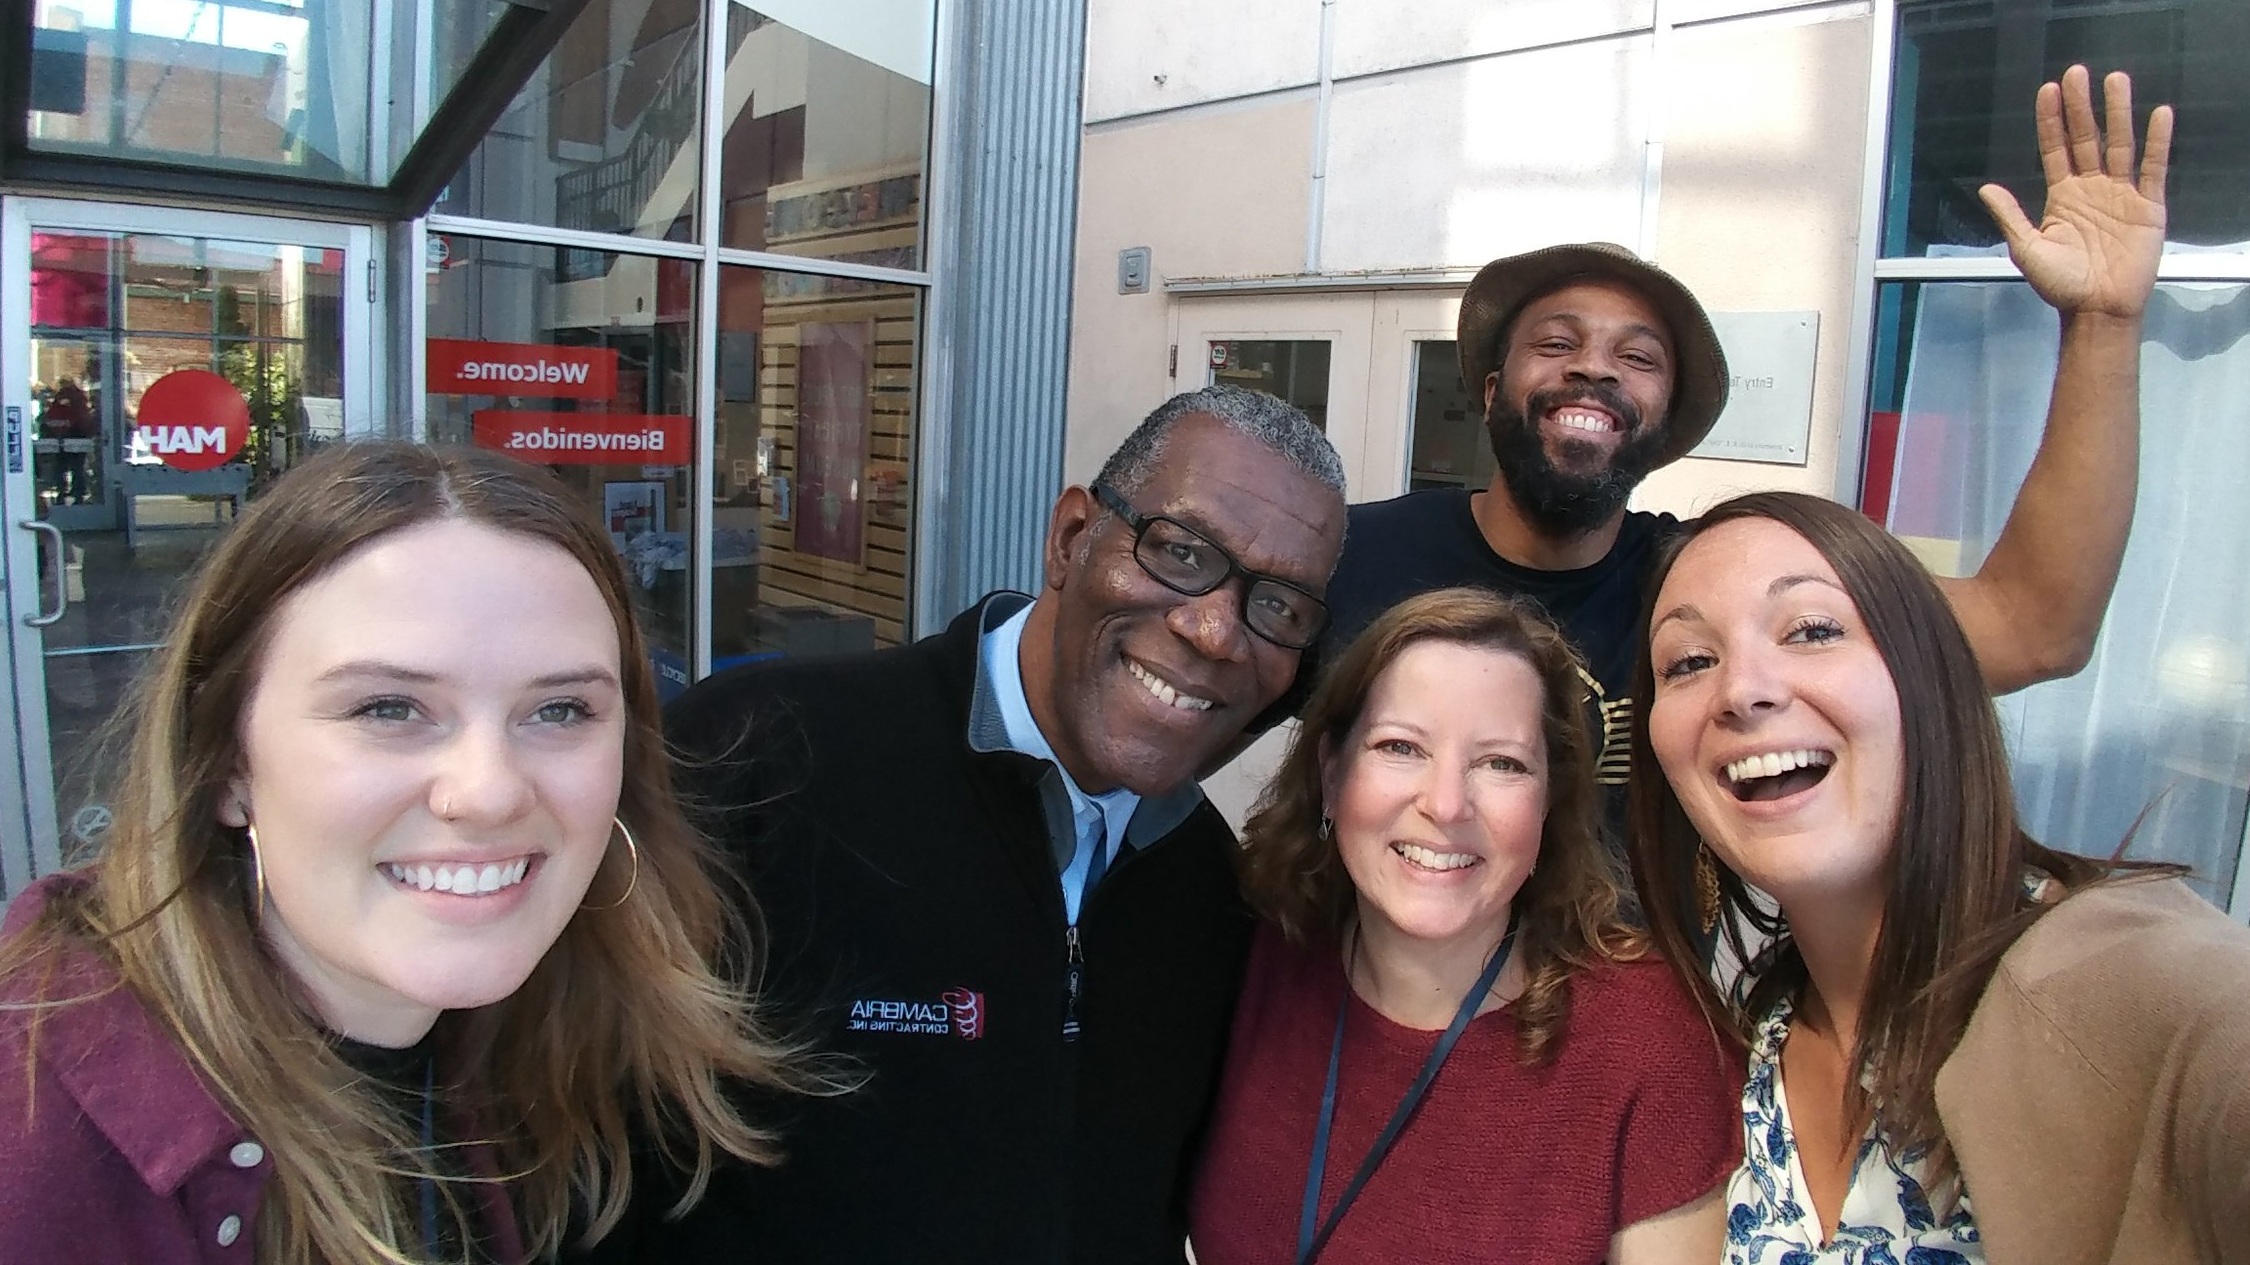 The Heritage Center’s OF/BY/FOR ALL team at the Change Network annual retreat: Emily Reynolds, Charles A. Walker, Christine Bacon, Saladin Allah, and Ally Spongr (Photo: Niagara Falls Underground Railroad Heritage Center)